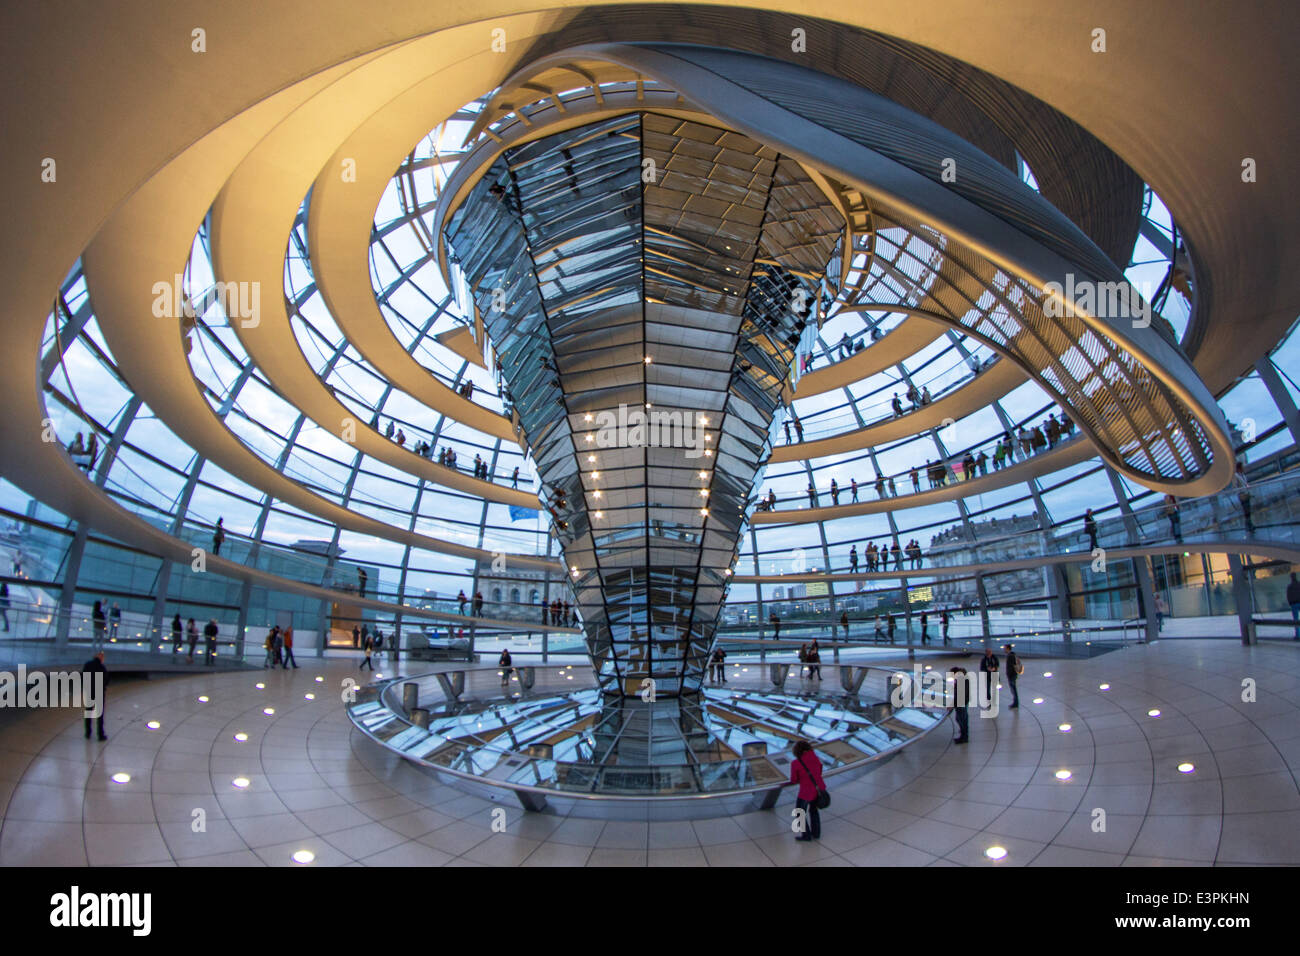 Germany: Inside view of the Reichstag dome Stock Photo